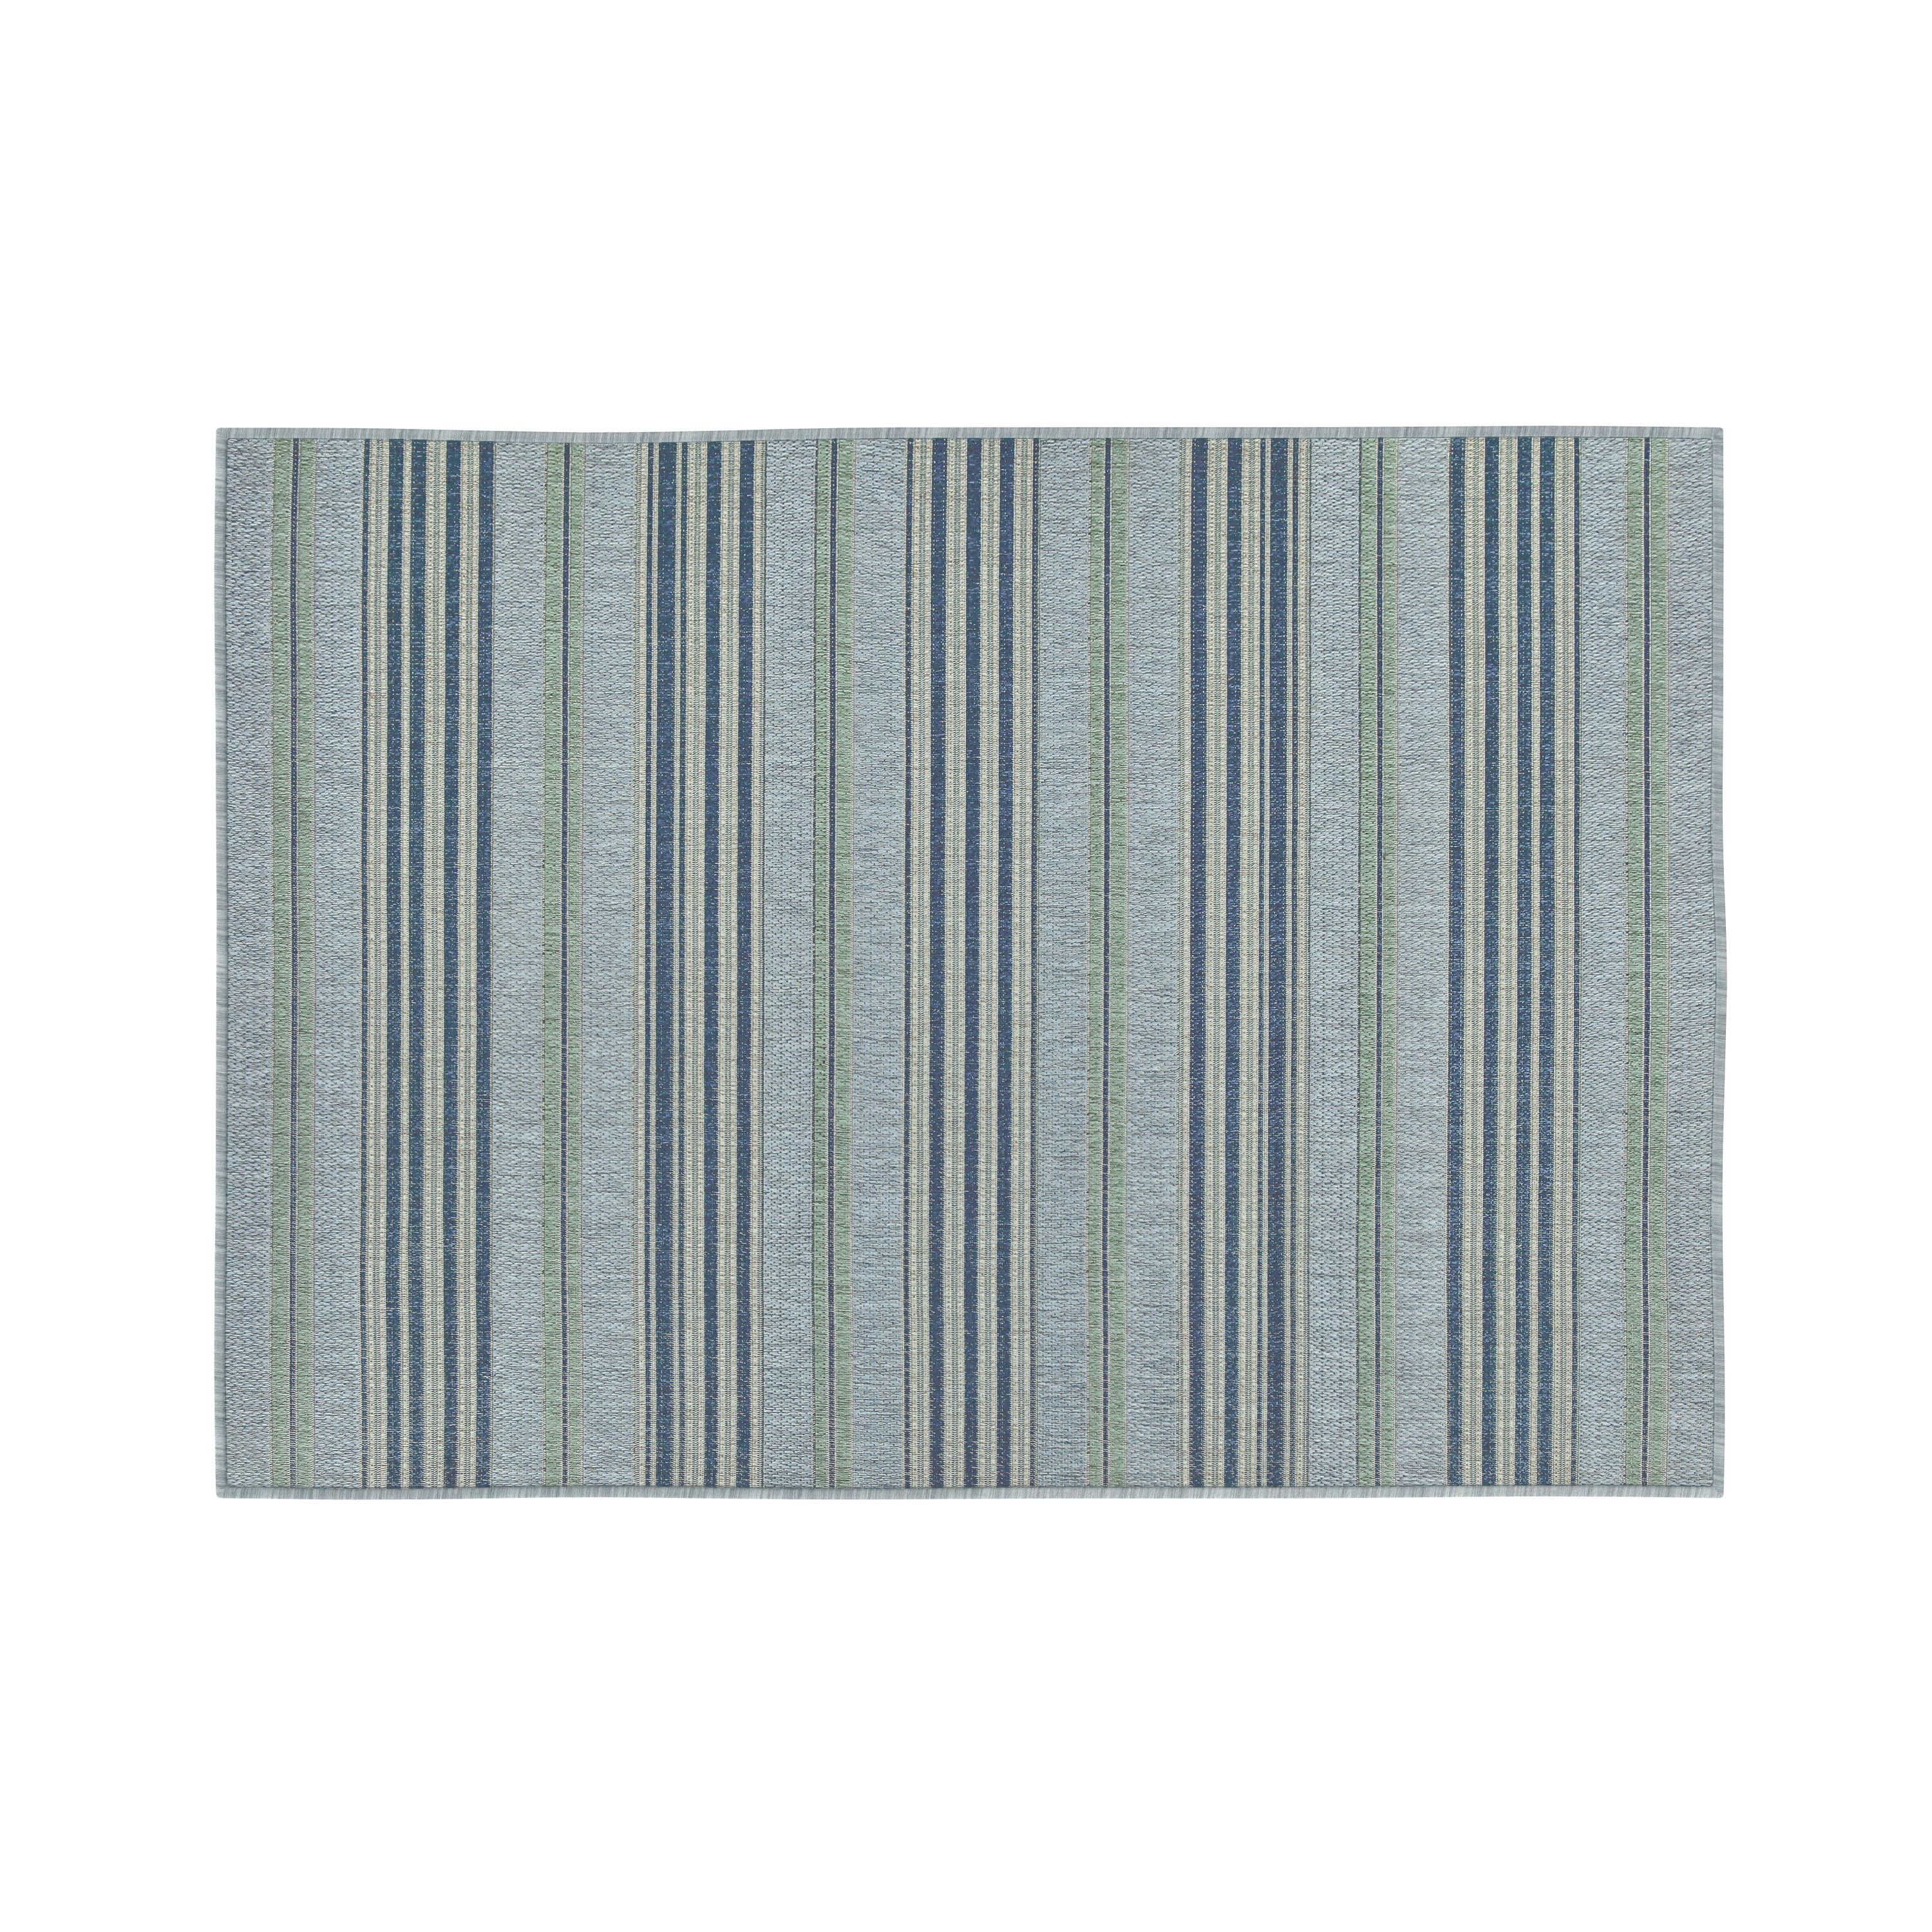 Allen Roth 5 X 7 Blue Outdoor Stripe, Blue And Green Rug